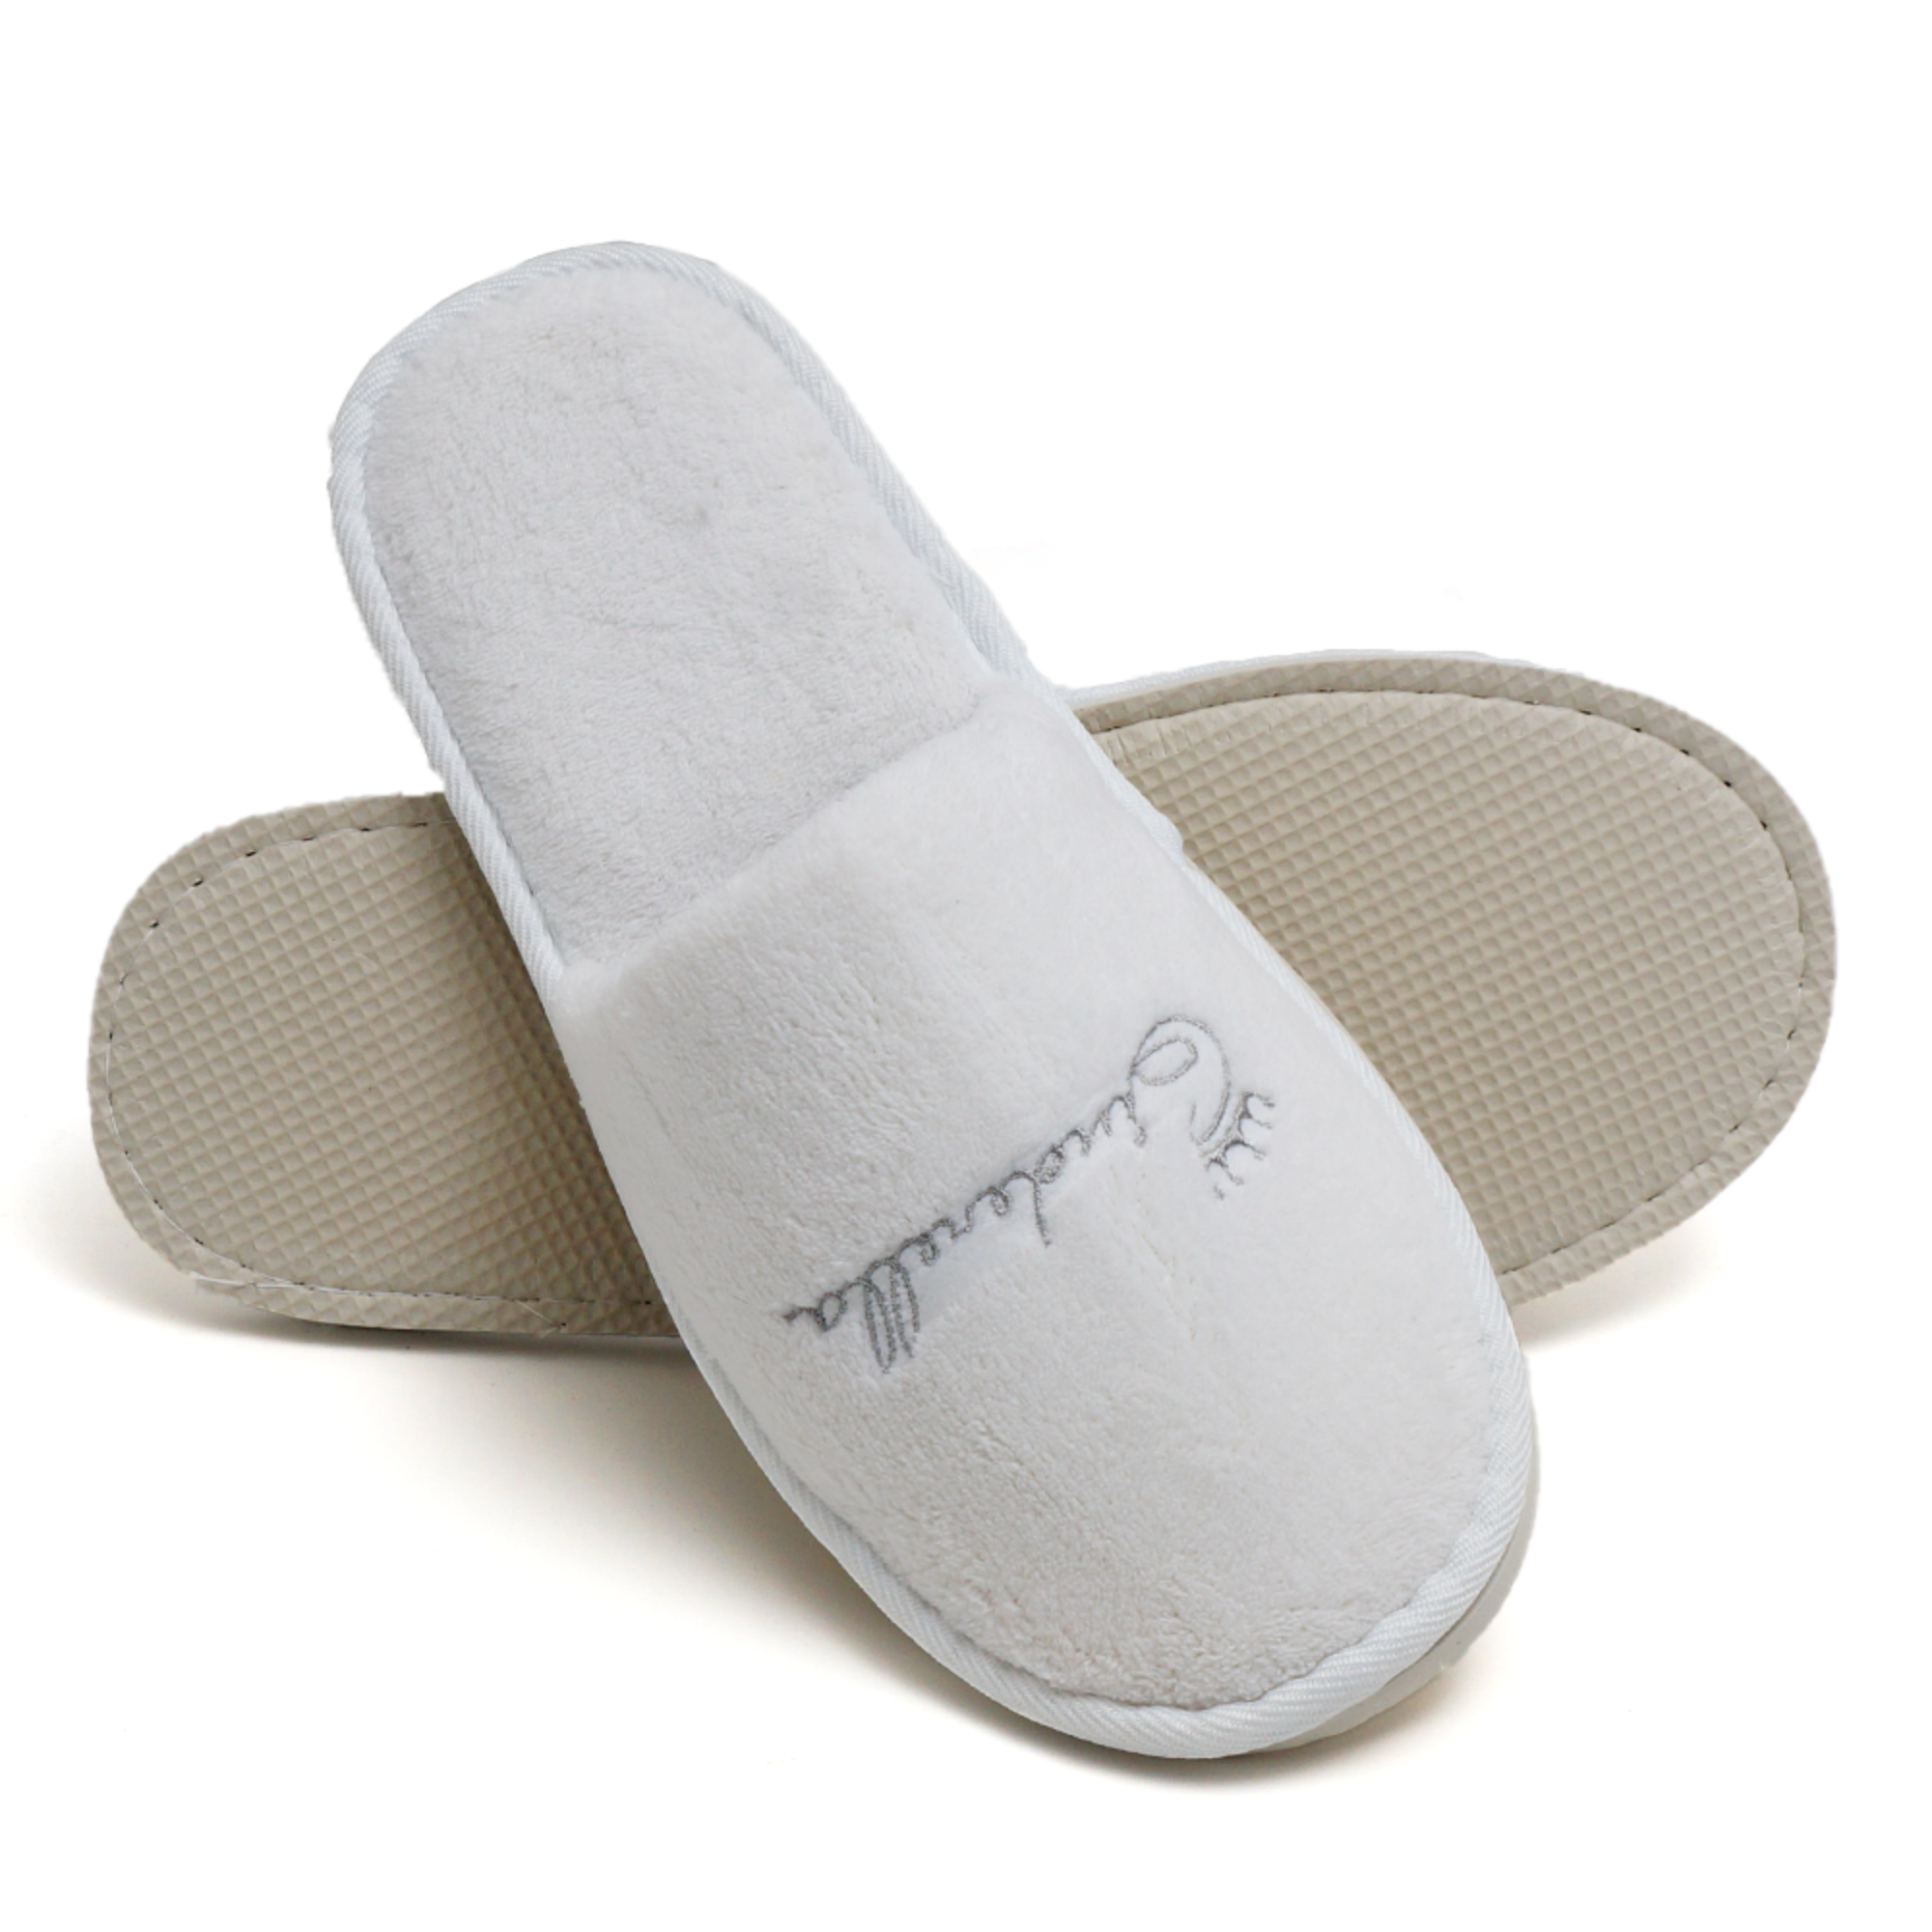 Hotel Slipper Closed Toe Luxury White Coral Fleece EVA Sole Spa 5 Star Disposable Slippers with Logo